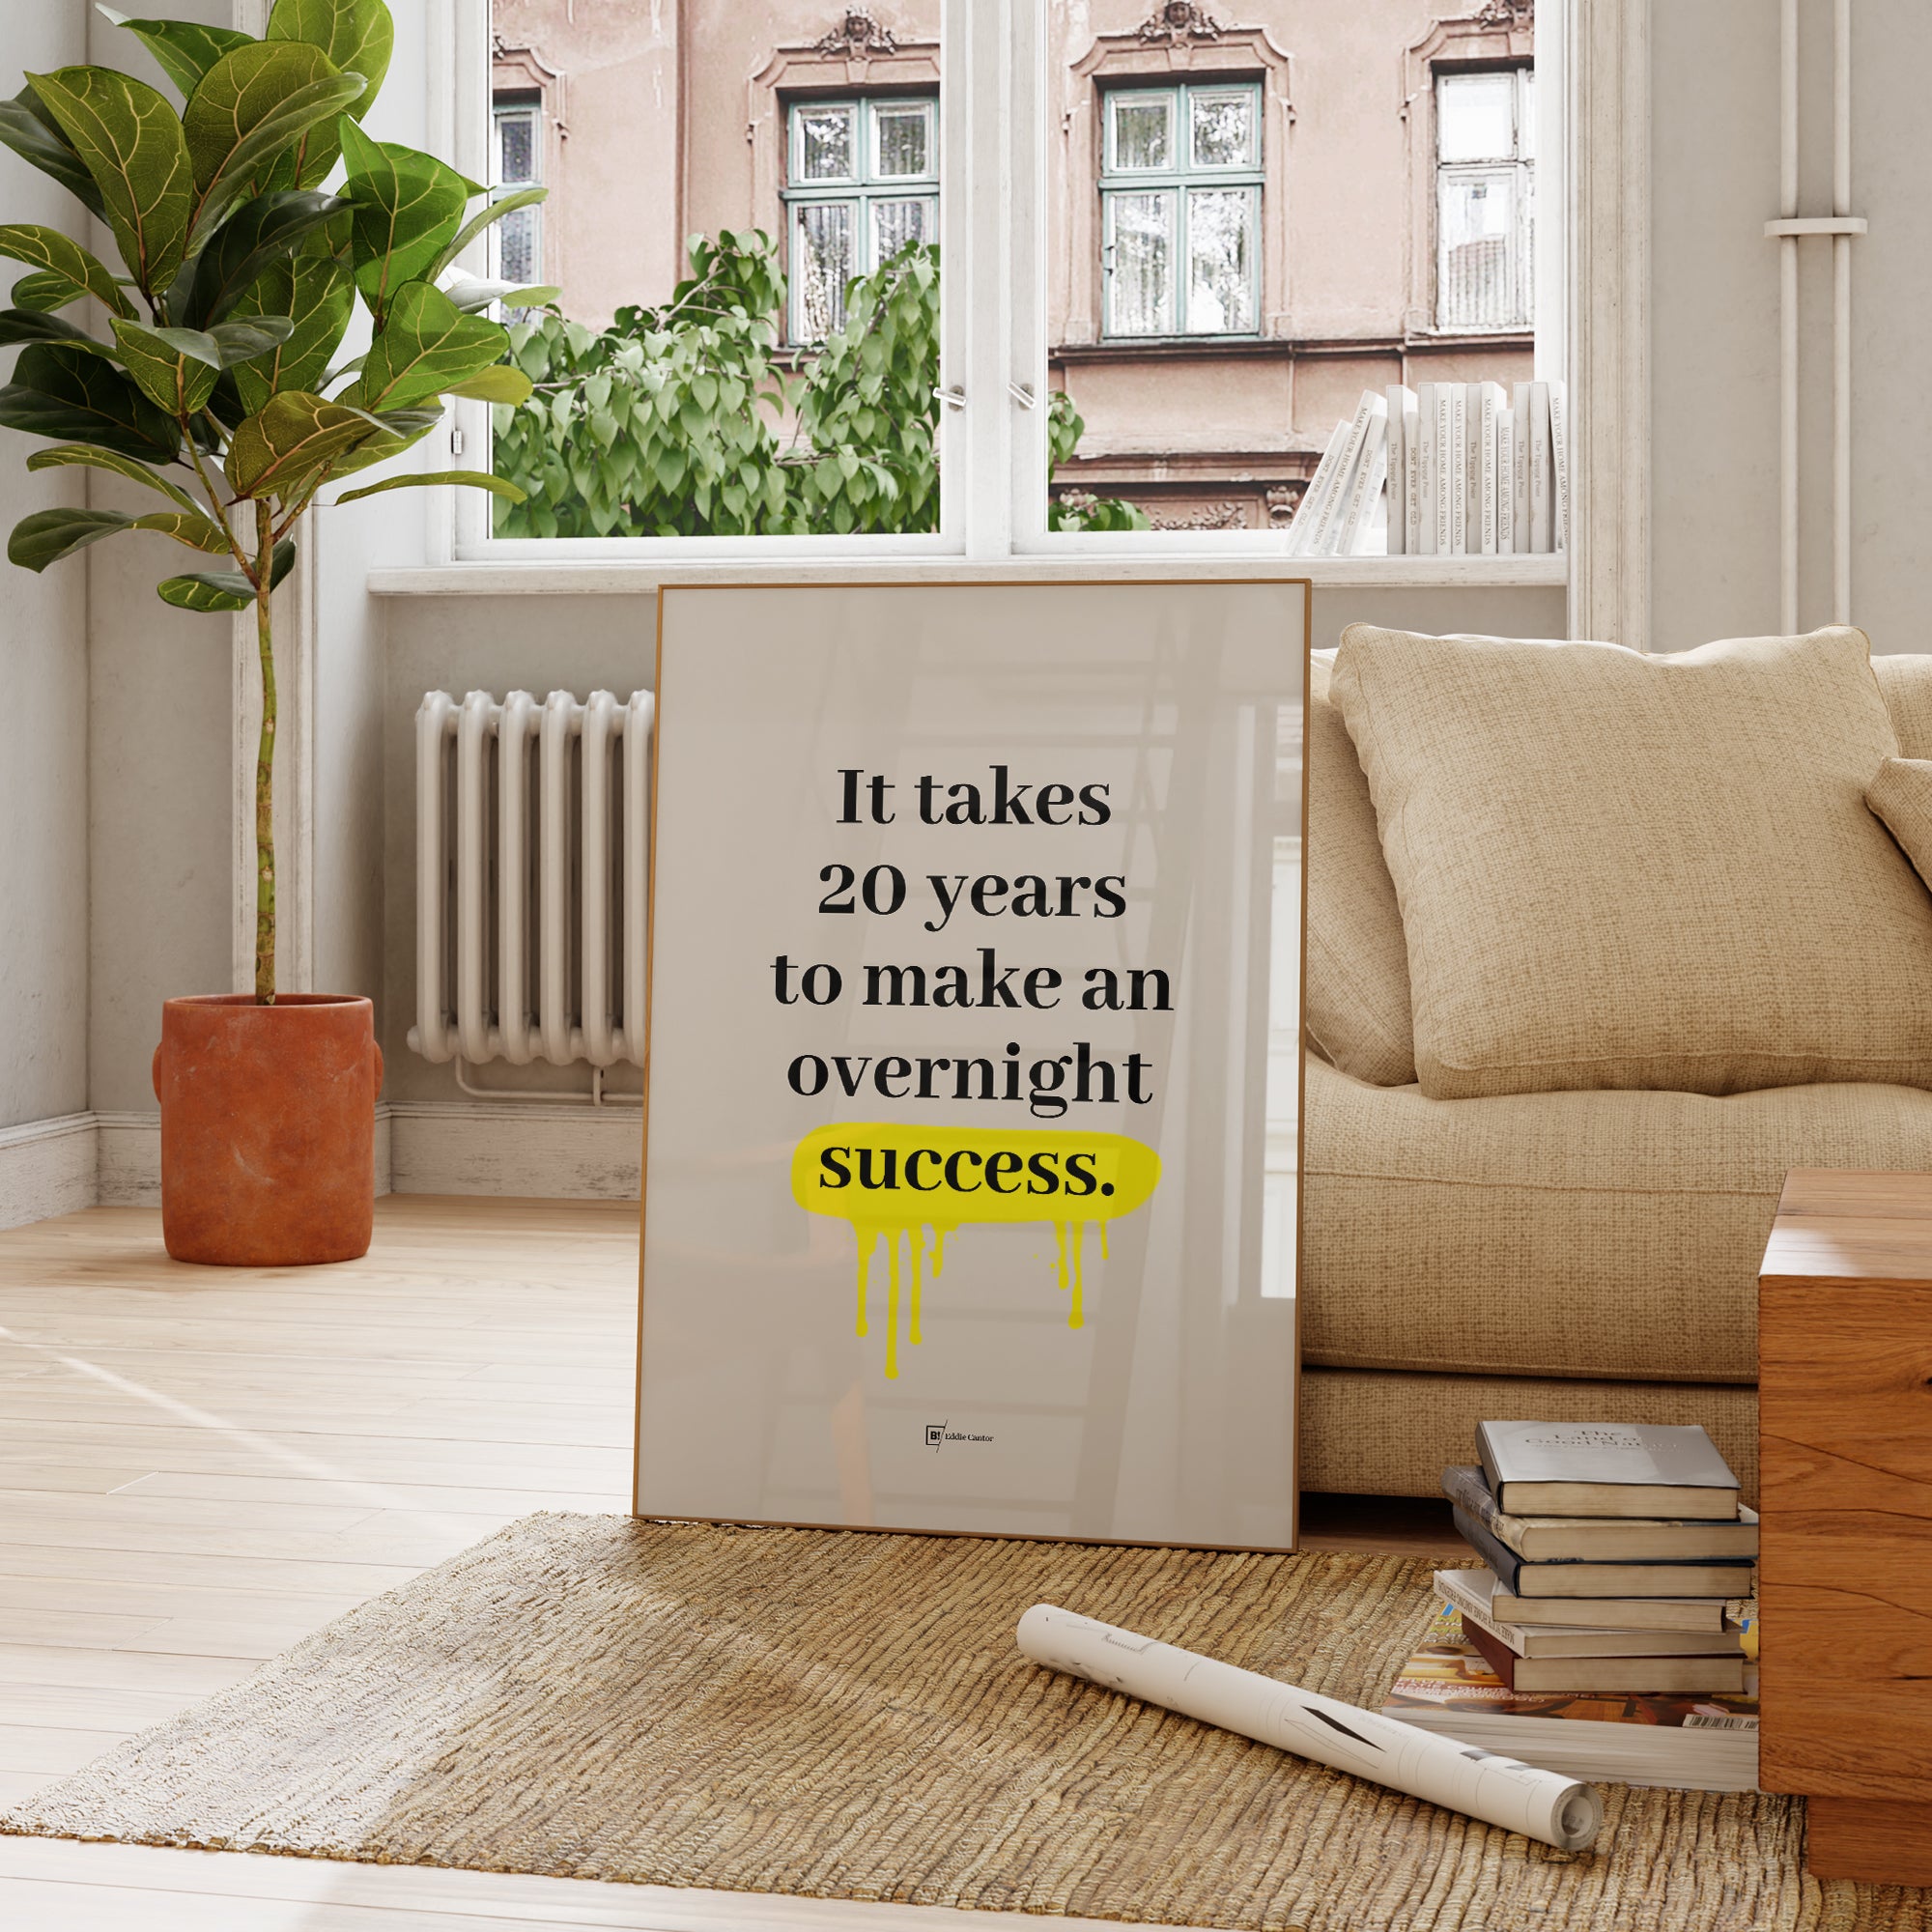 Be inspired by Eddie Cantor's famous "It takes 20 years to make an overnight success" quote art print. This artwork was printed using the giclée process on archival acid-free paper and is presented in a french living room that captures its timeless beauty in every detail.